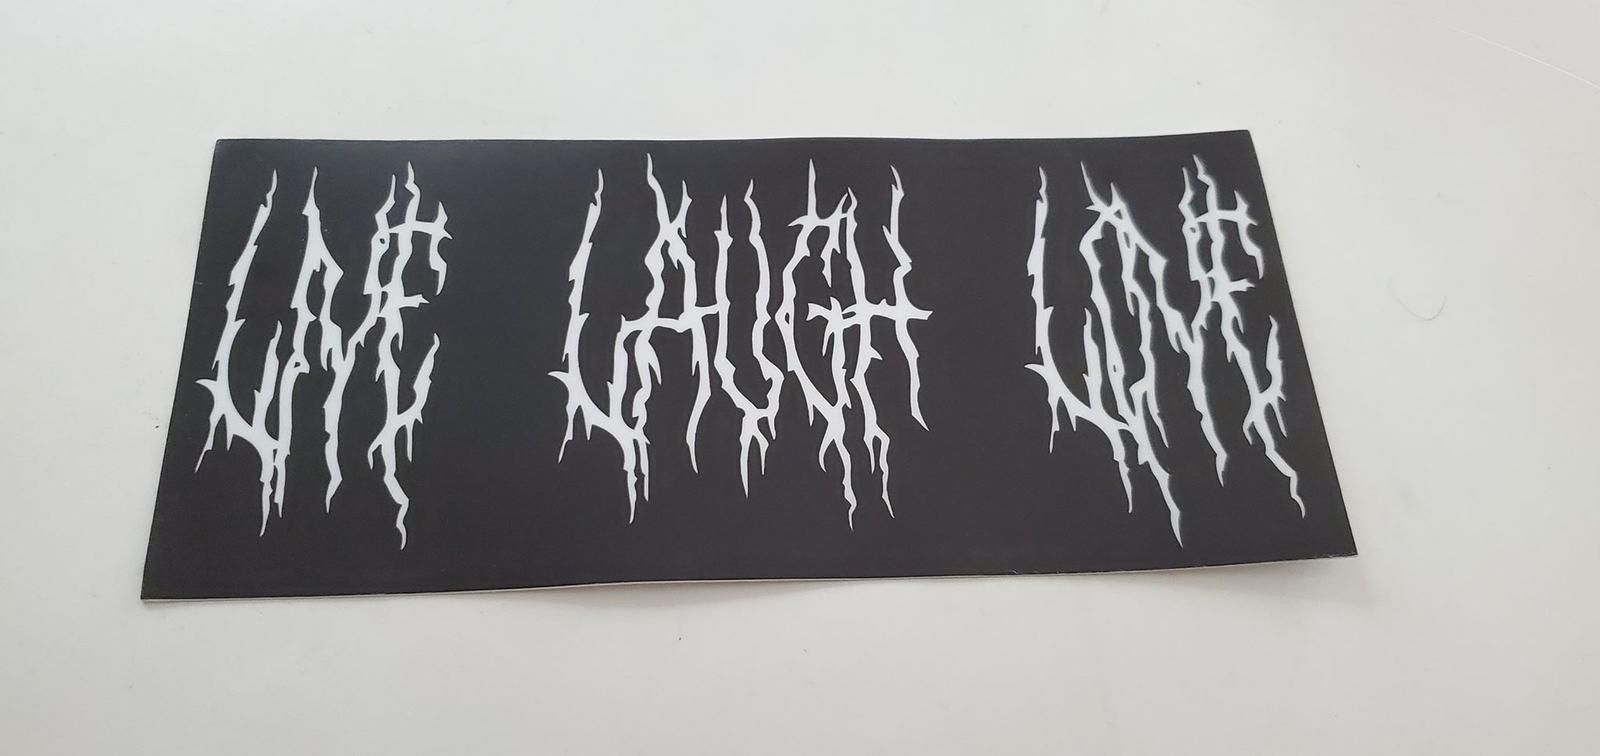 My friend wants to start being more positive, but doesn't want to give up his dark brooding image. So I made him some stickers.